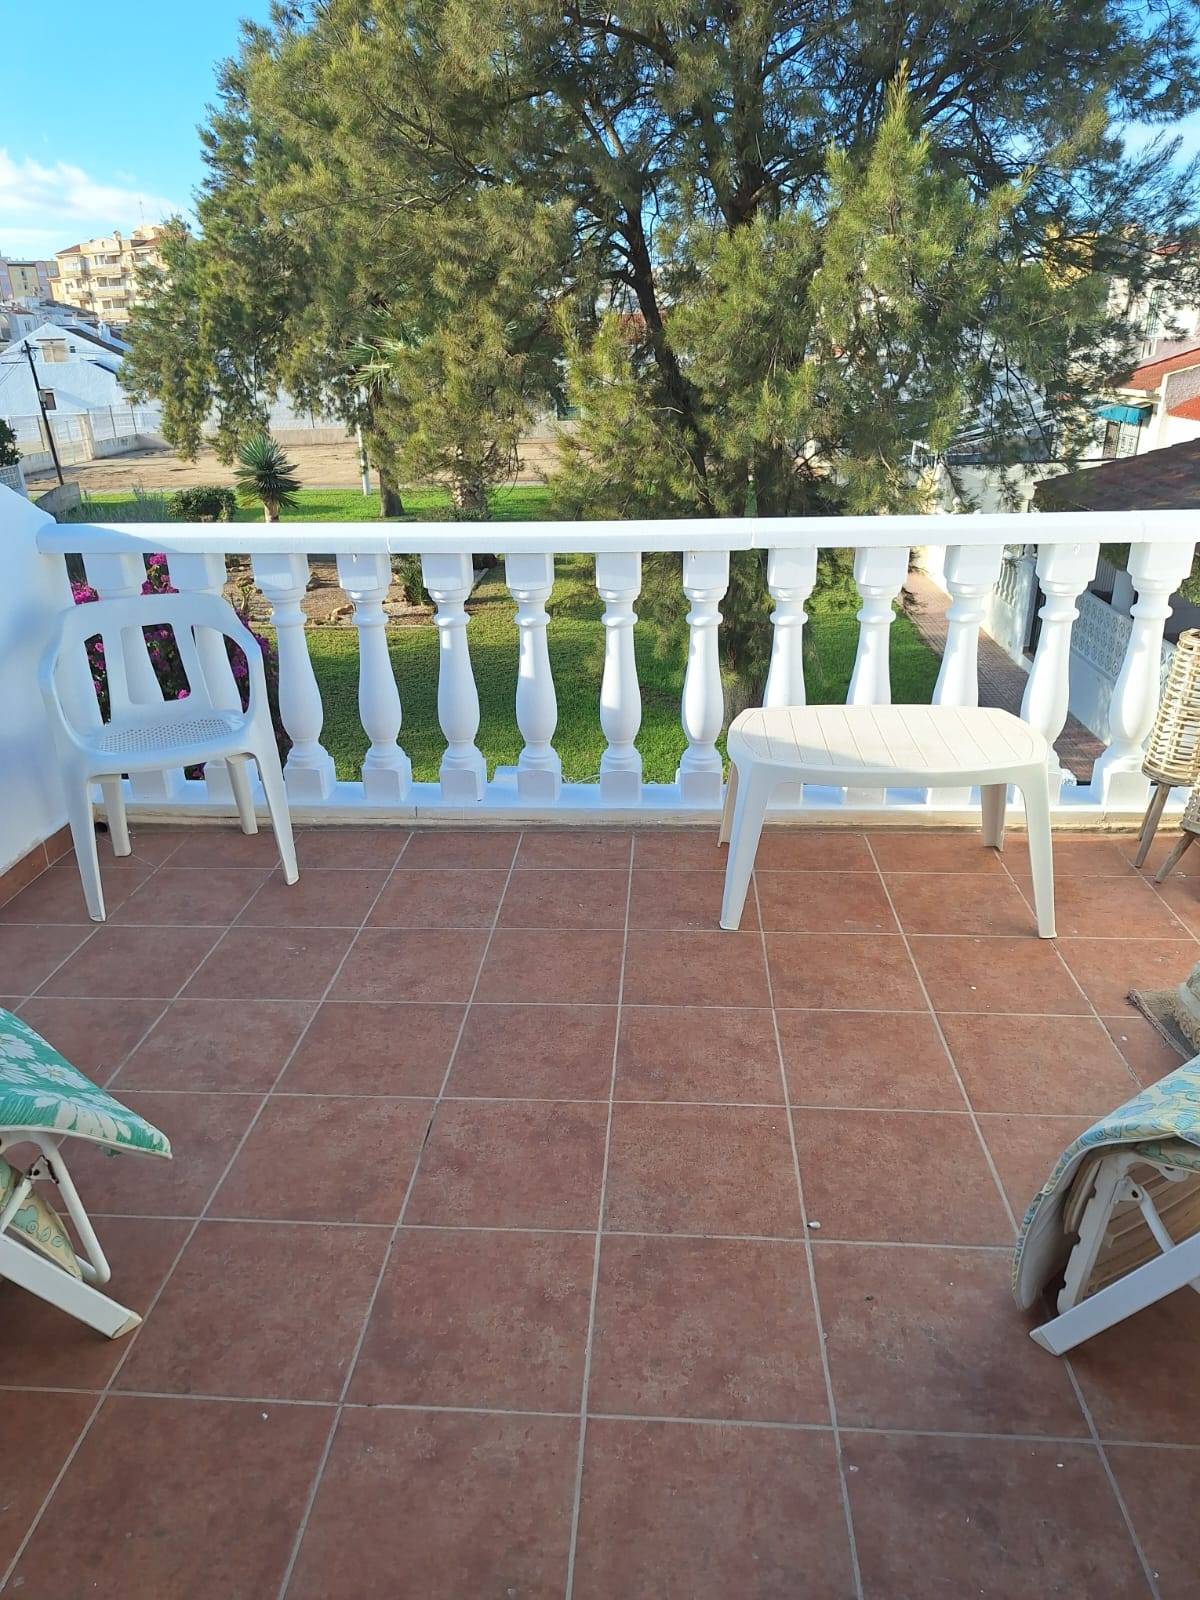 SEMI-DETACHED DUPLEX BUNGALOW 700 METERS FROM THE BEACH IN CALAS BLANCAS